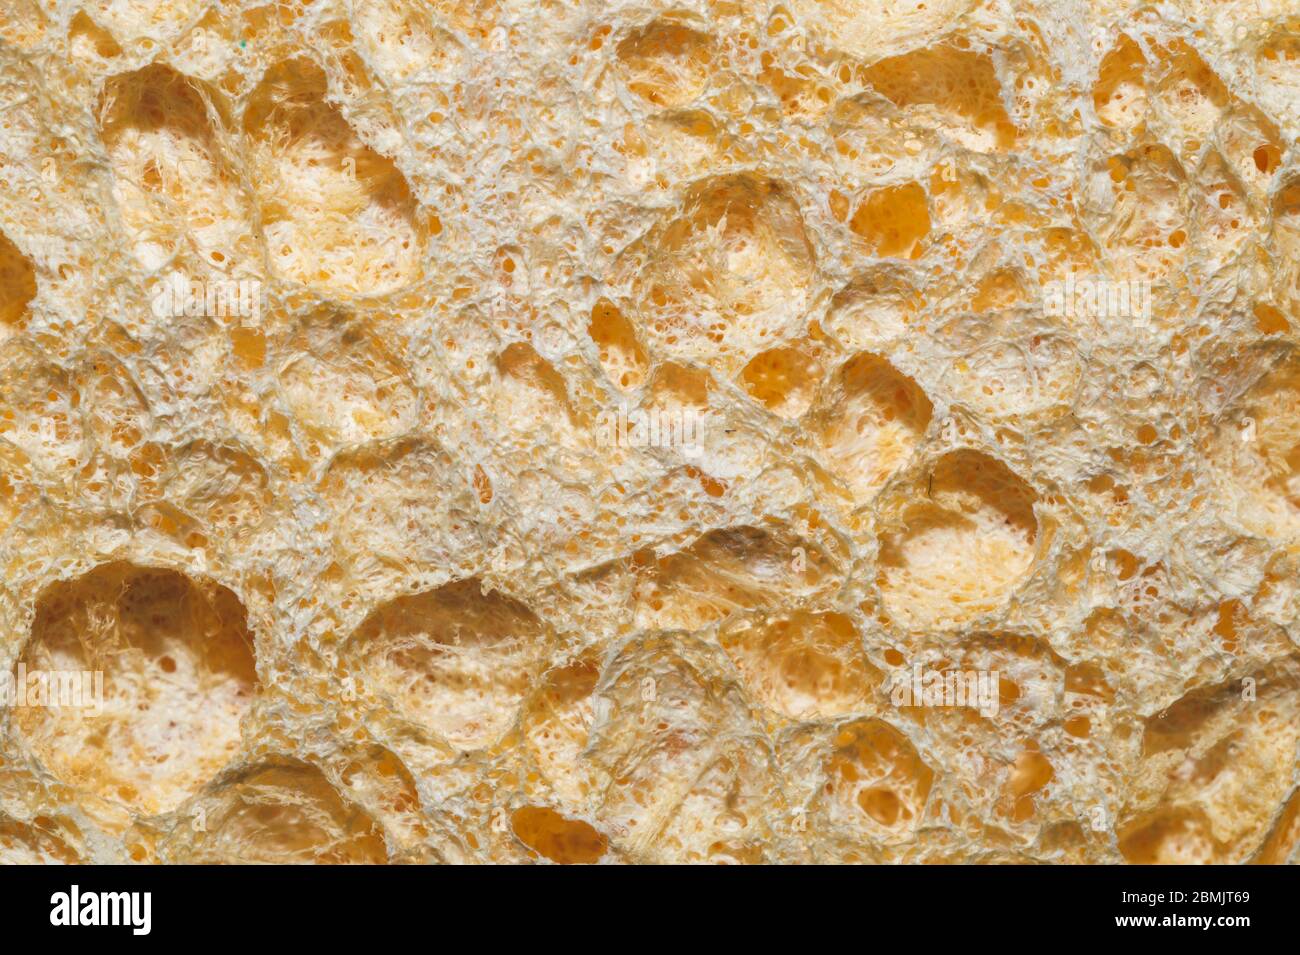 Porous material texture close up. rough surface. abstract background Stock Photo